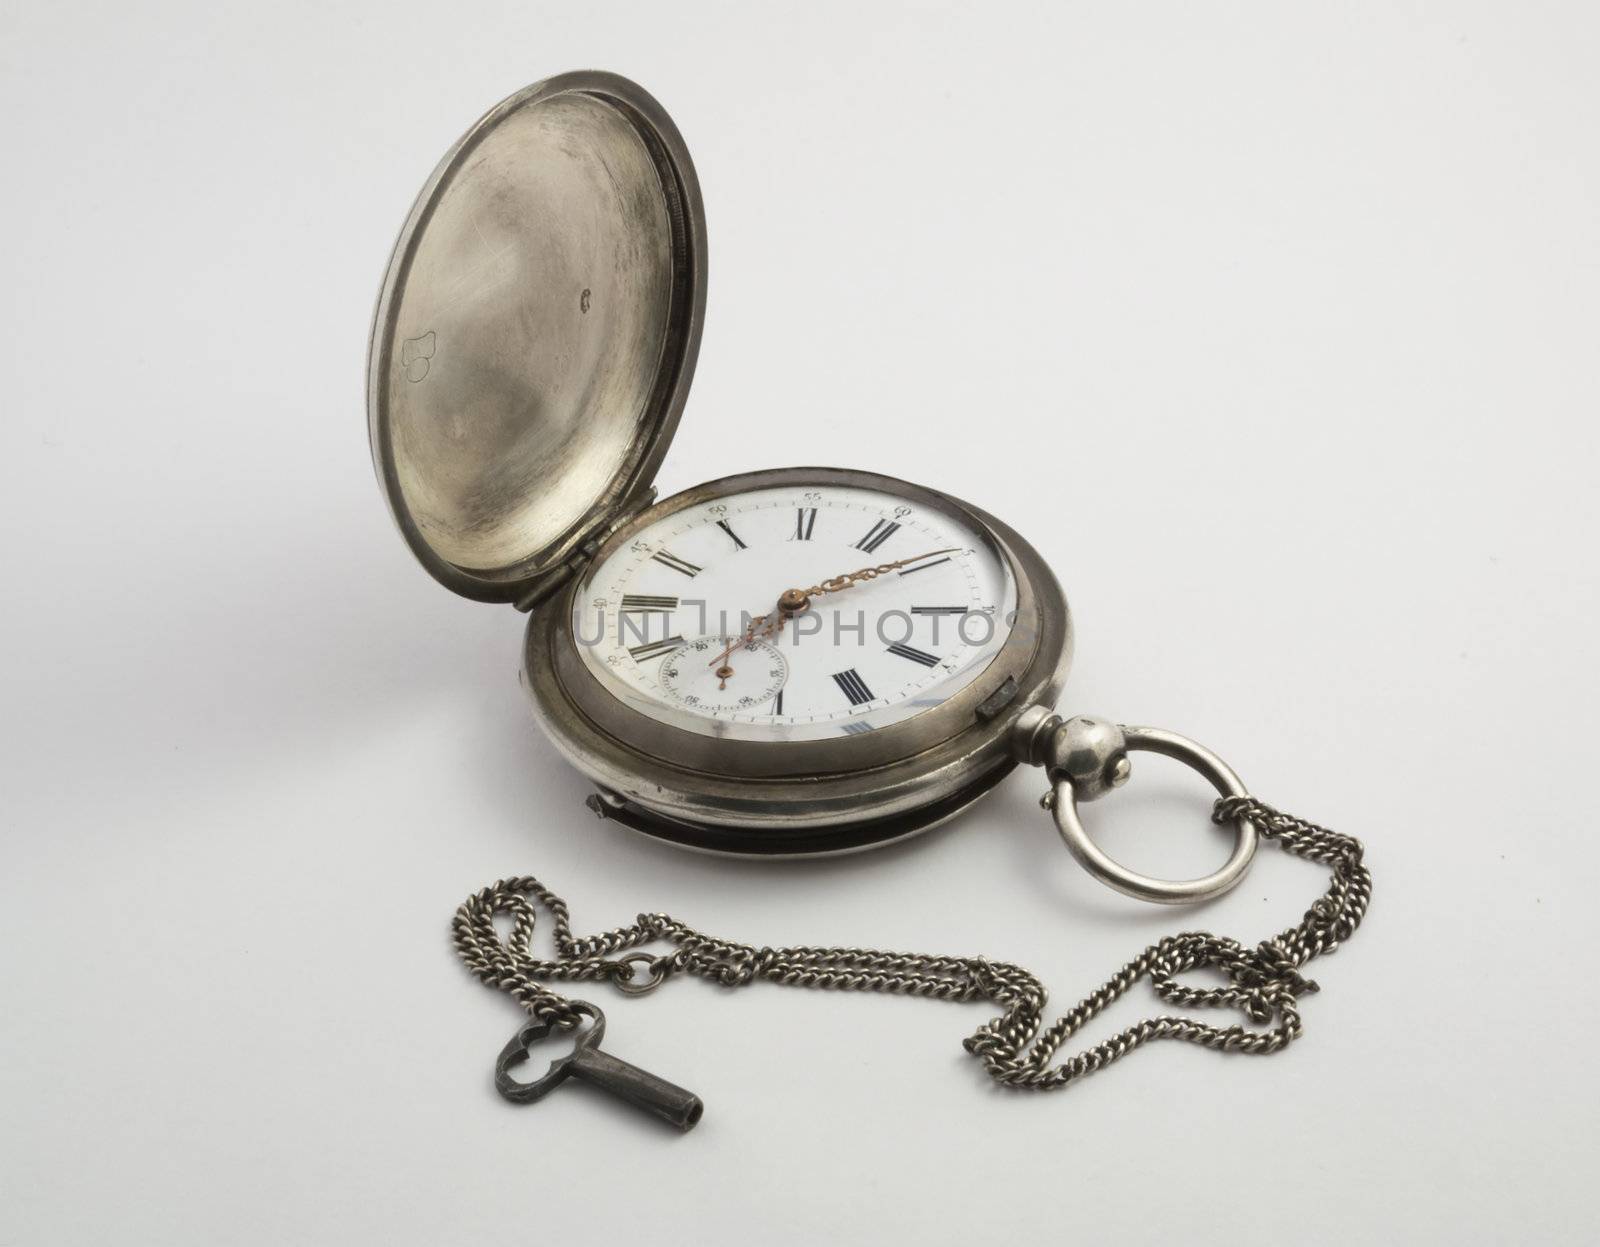 Antique pocket watch in silver with small key on a light background. Appearance with the lid open.